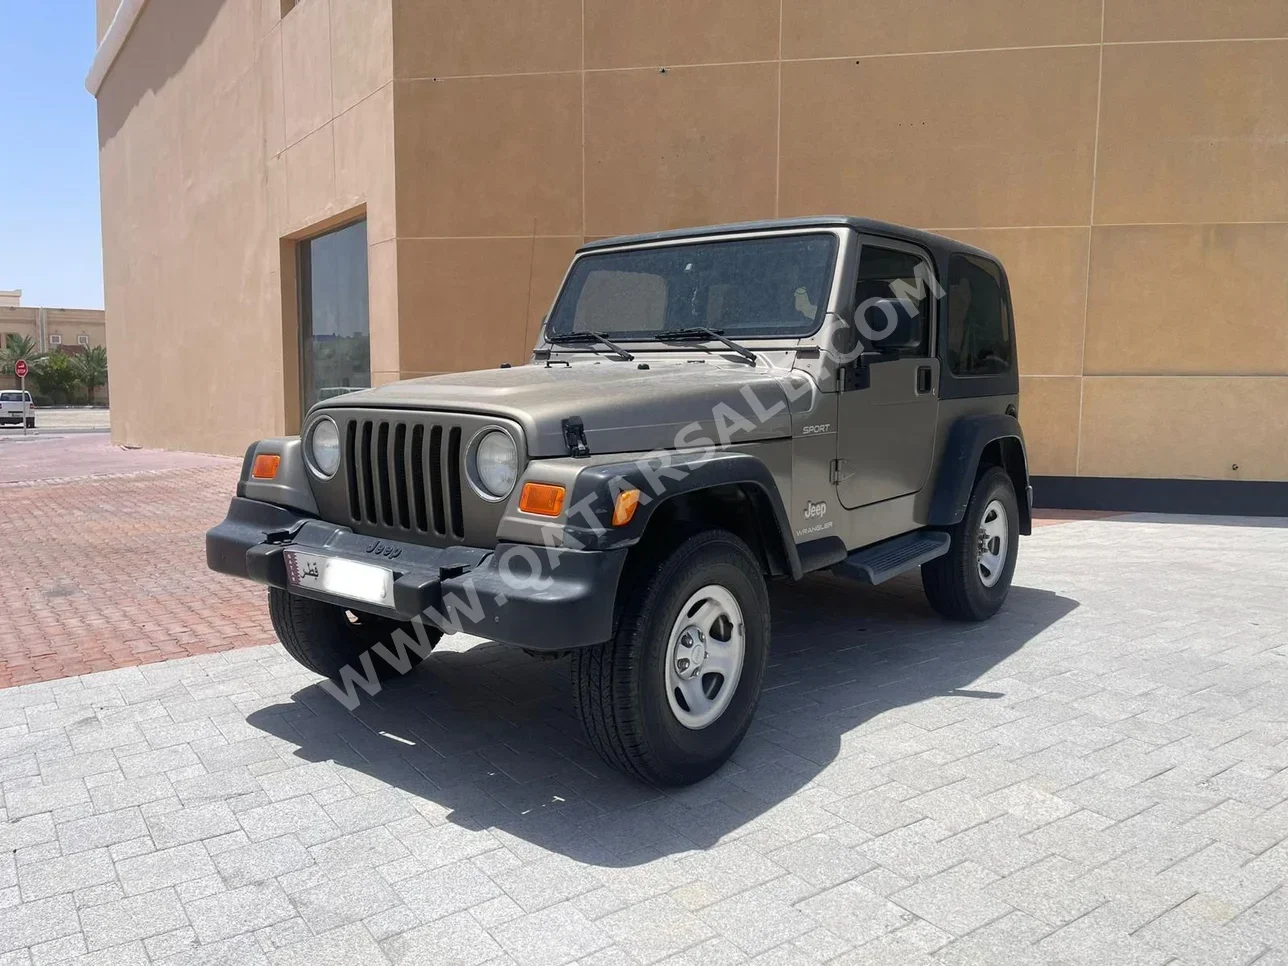 Jeep  Wrangler  Sport  2003  Manual  289,000 Km  6 Cylinder  Four Wheel Drive (4WD)  SUV  Olive Green